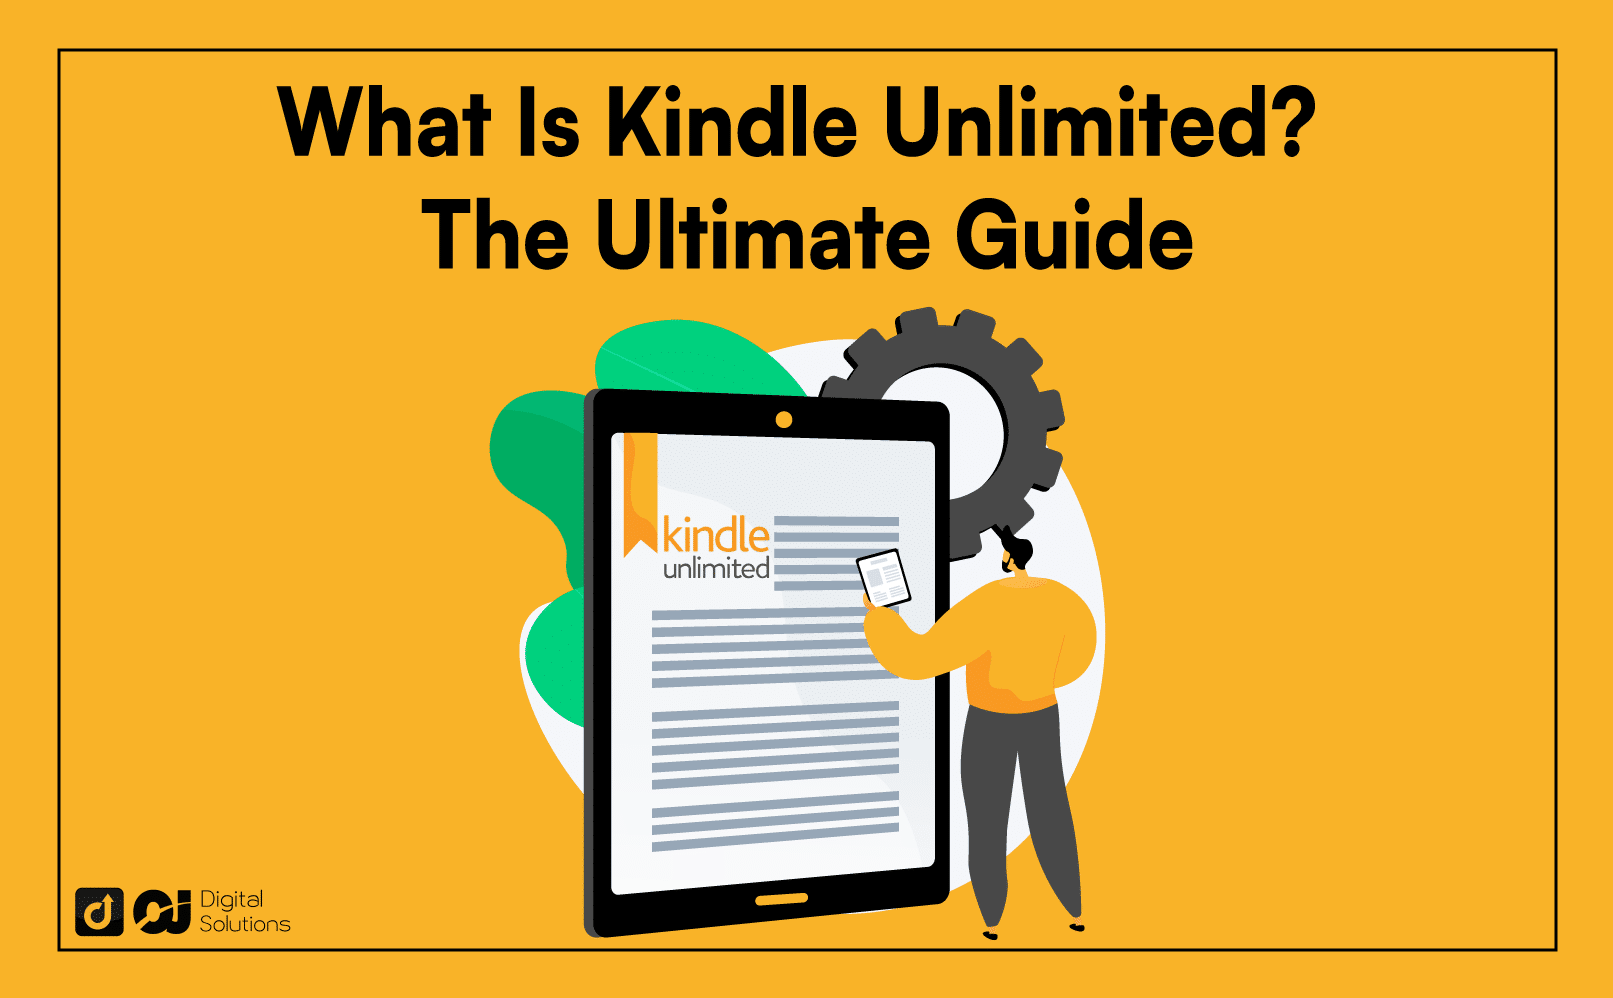 what is kindle unlimited